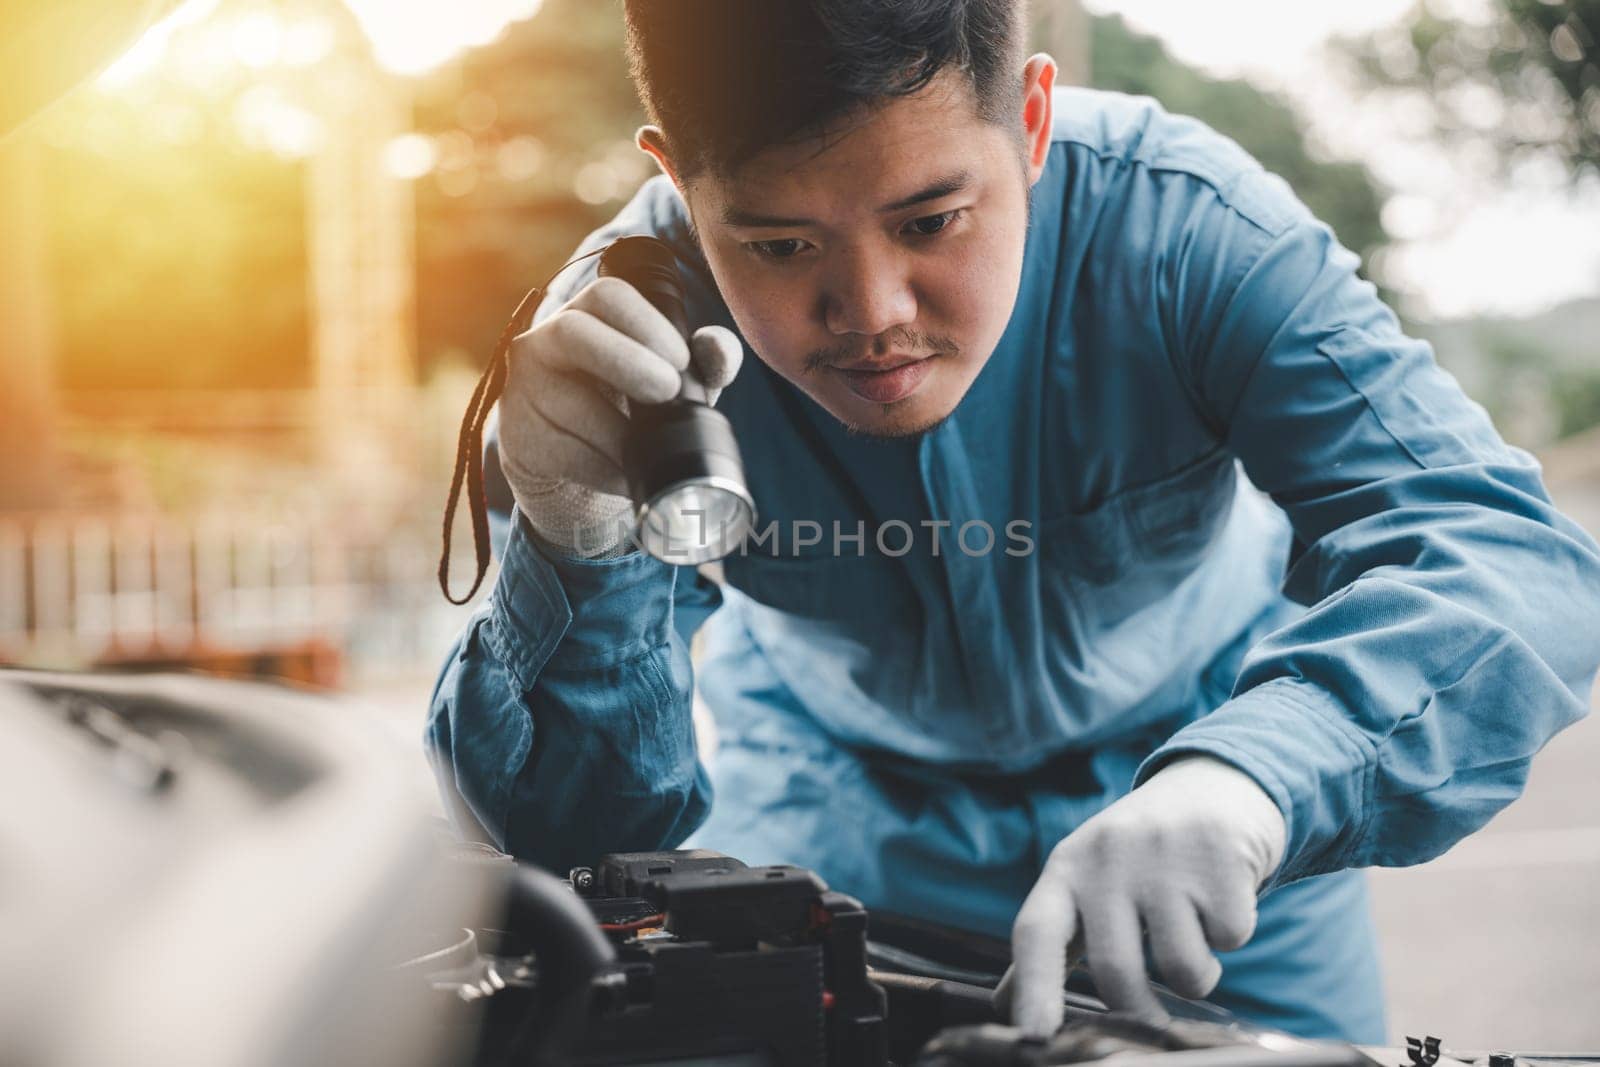 Car mechanic service technician analyzing auto engine problems with an electric lamp on the cradle. Expert repairing a car in the workshop.